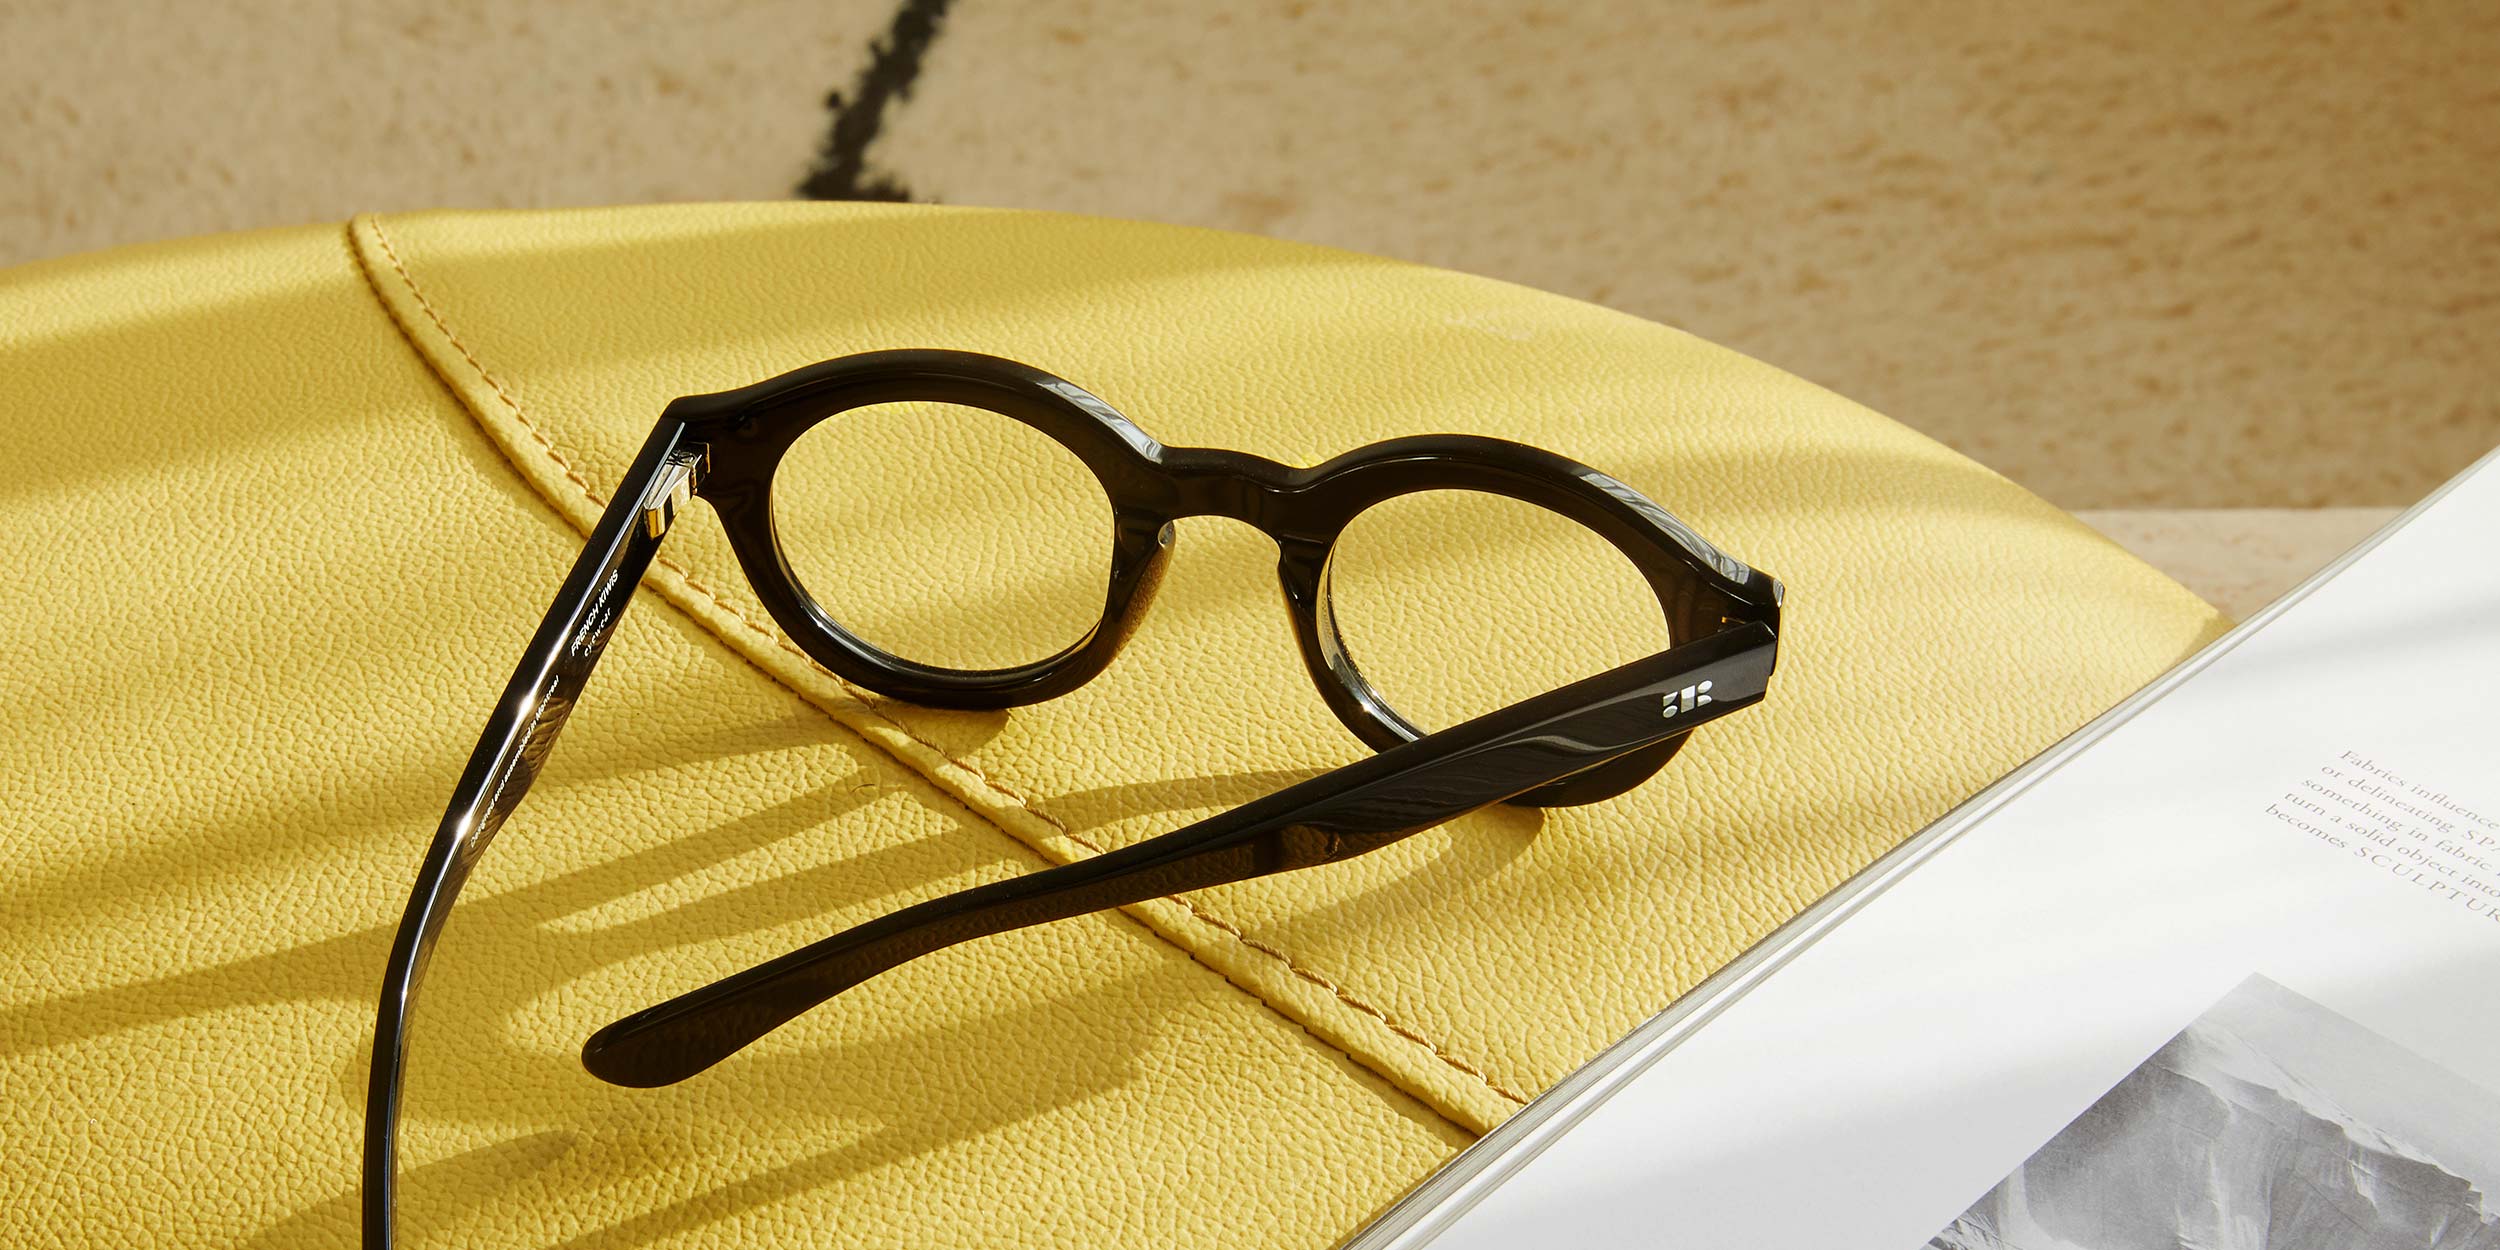 Photo Details of Eden Brown Reading Glasses in a room